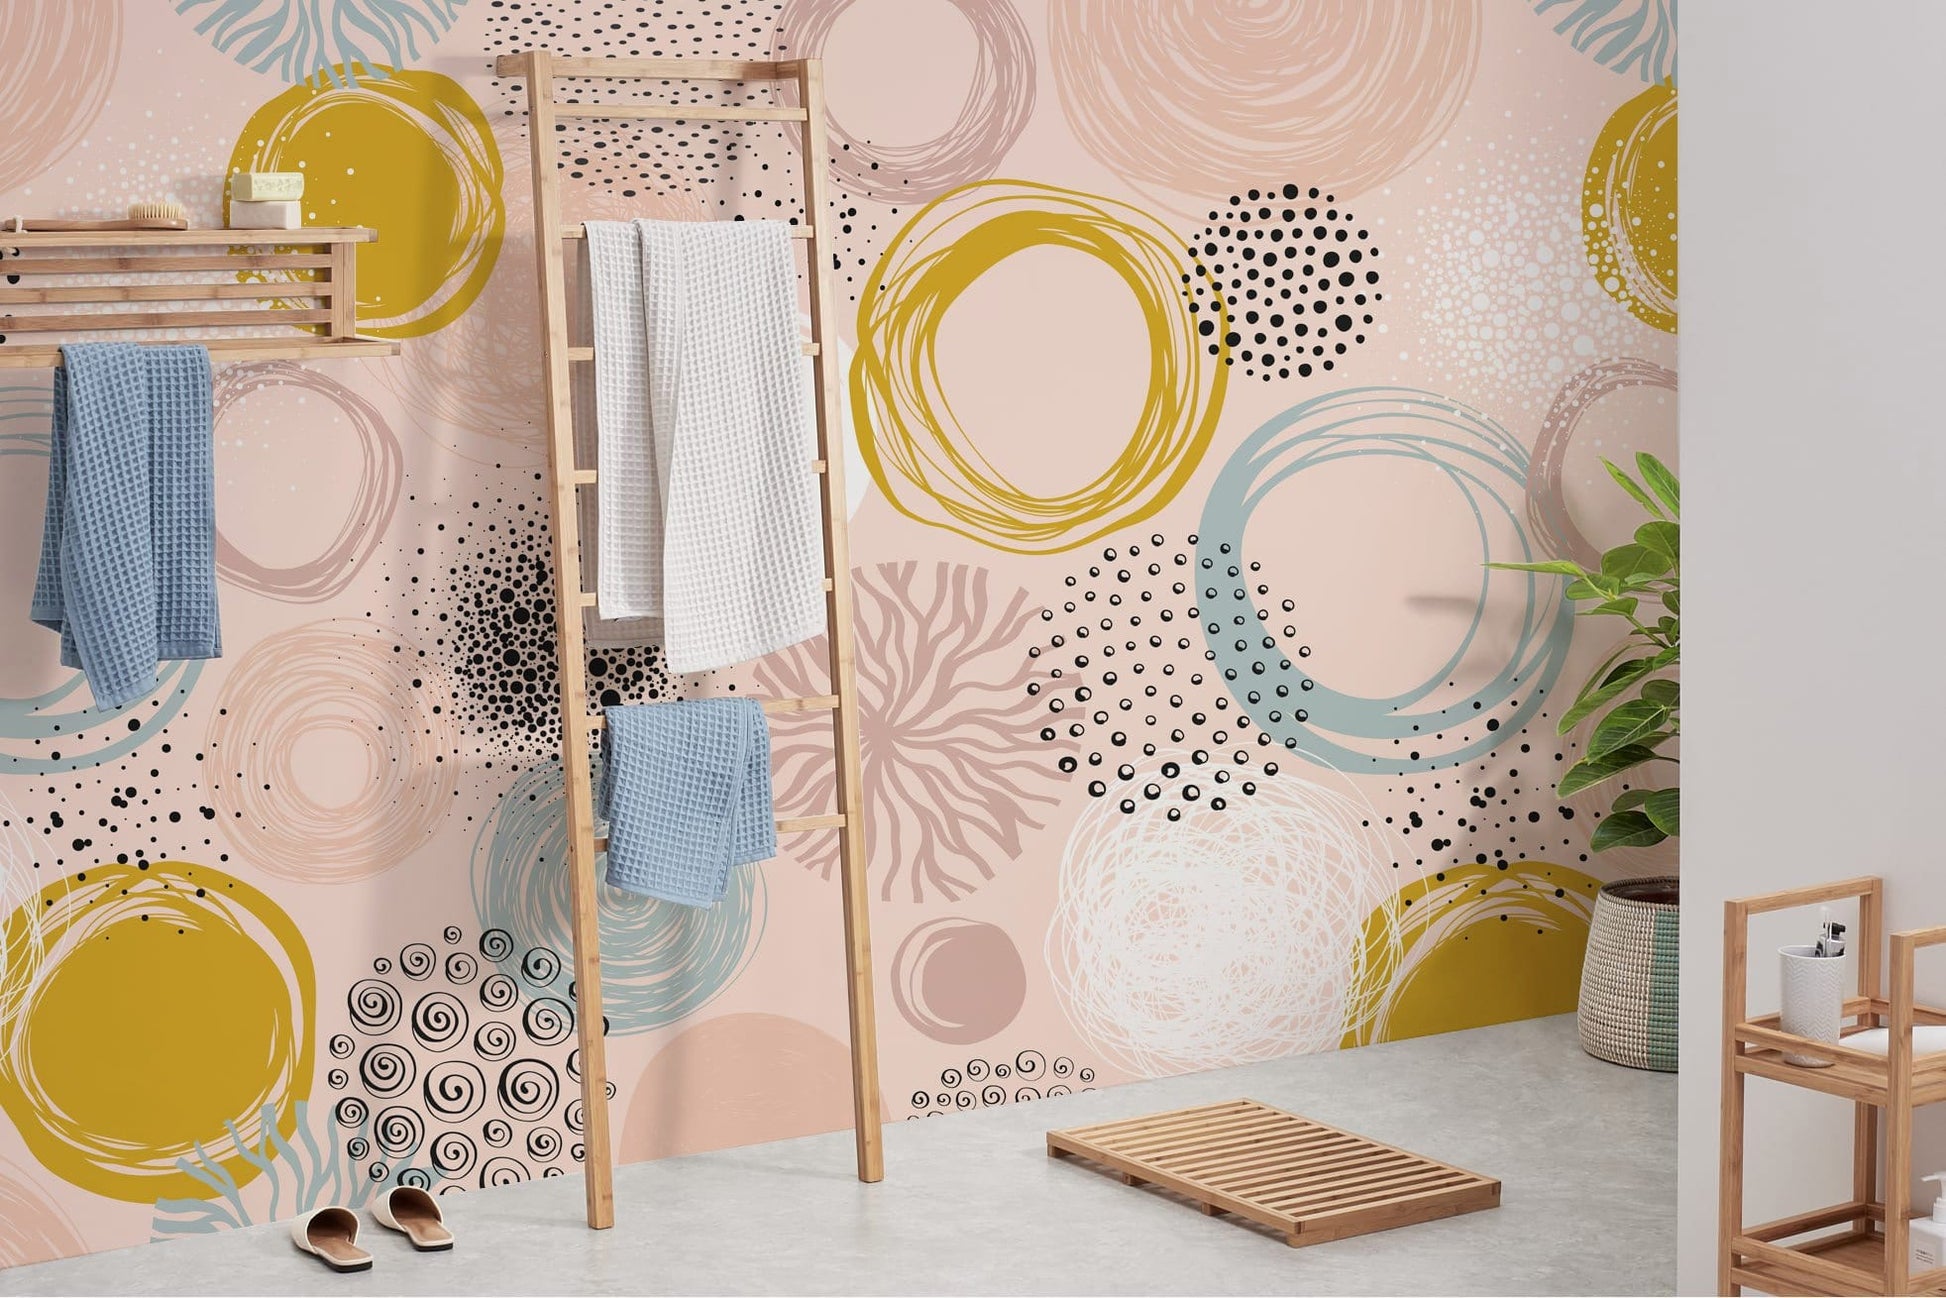 Art Deco Round Pattern Wallpaper Mural for Use in Decorating the Bathroom